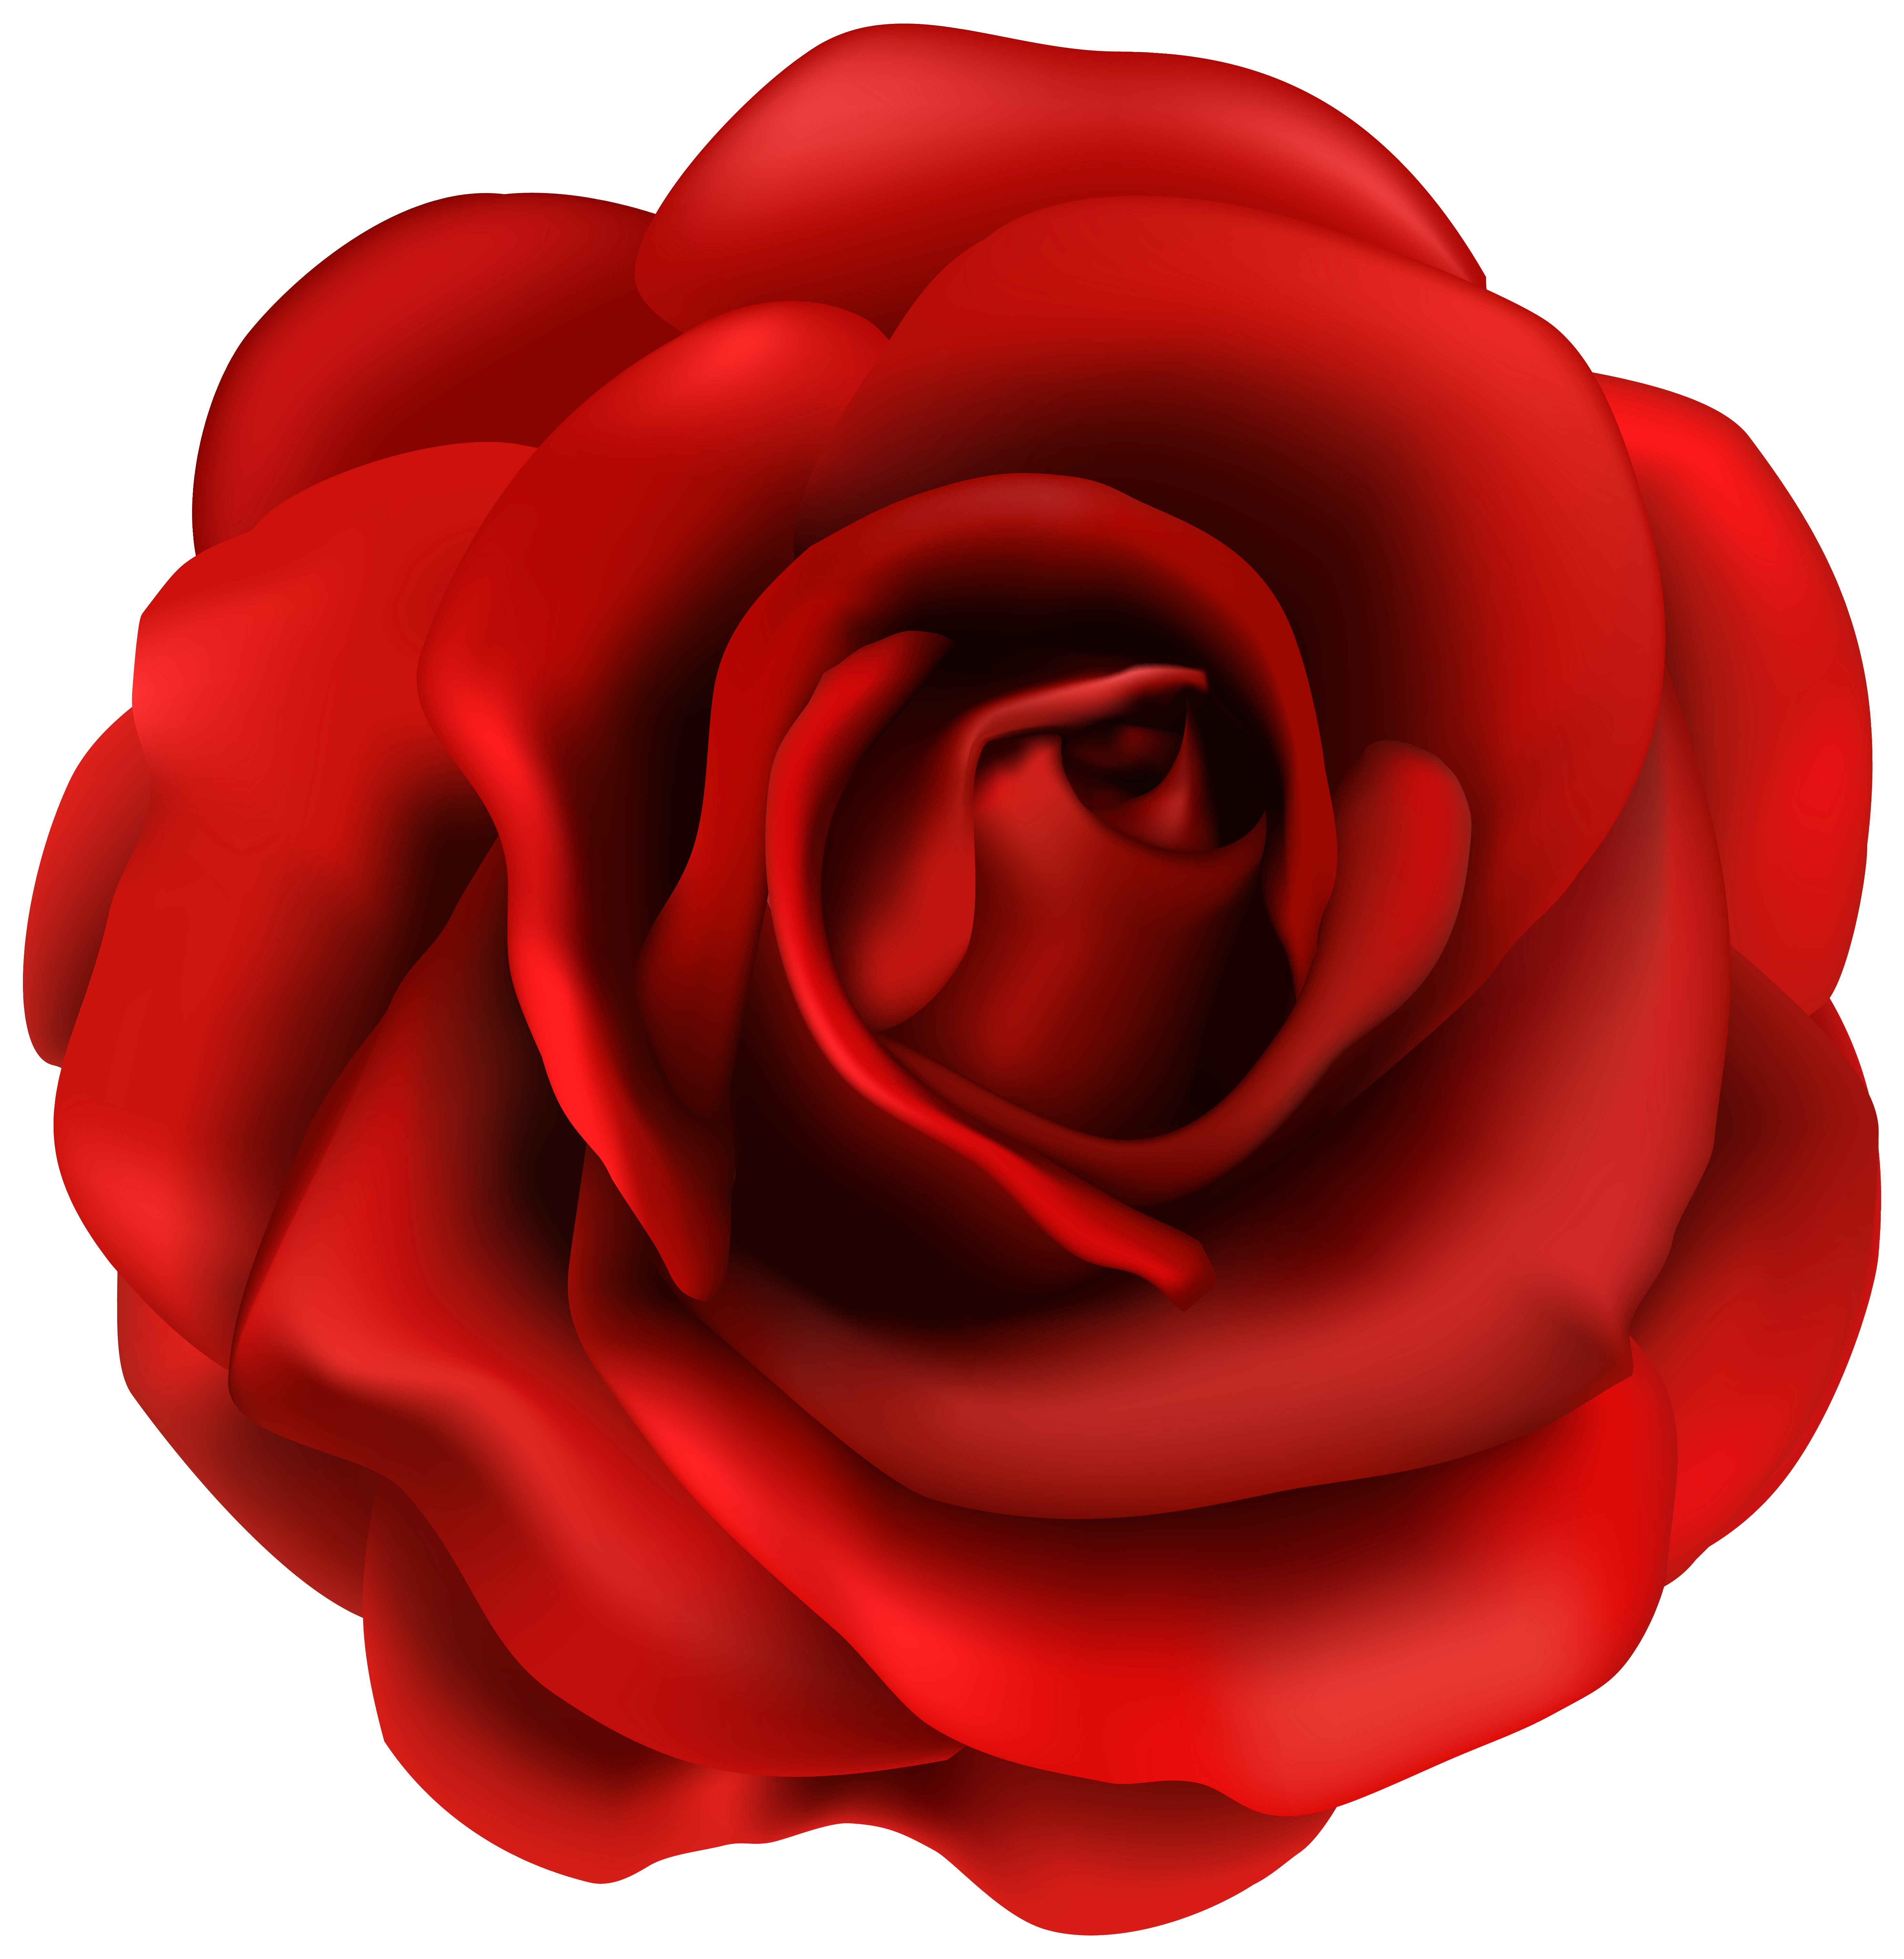 Red Rose Flower Clipart Image Cliparting